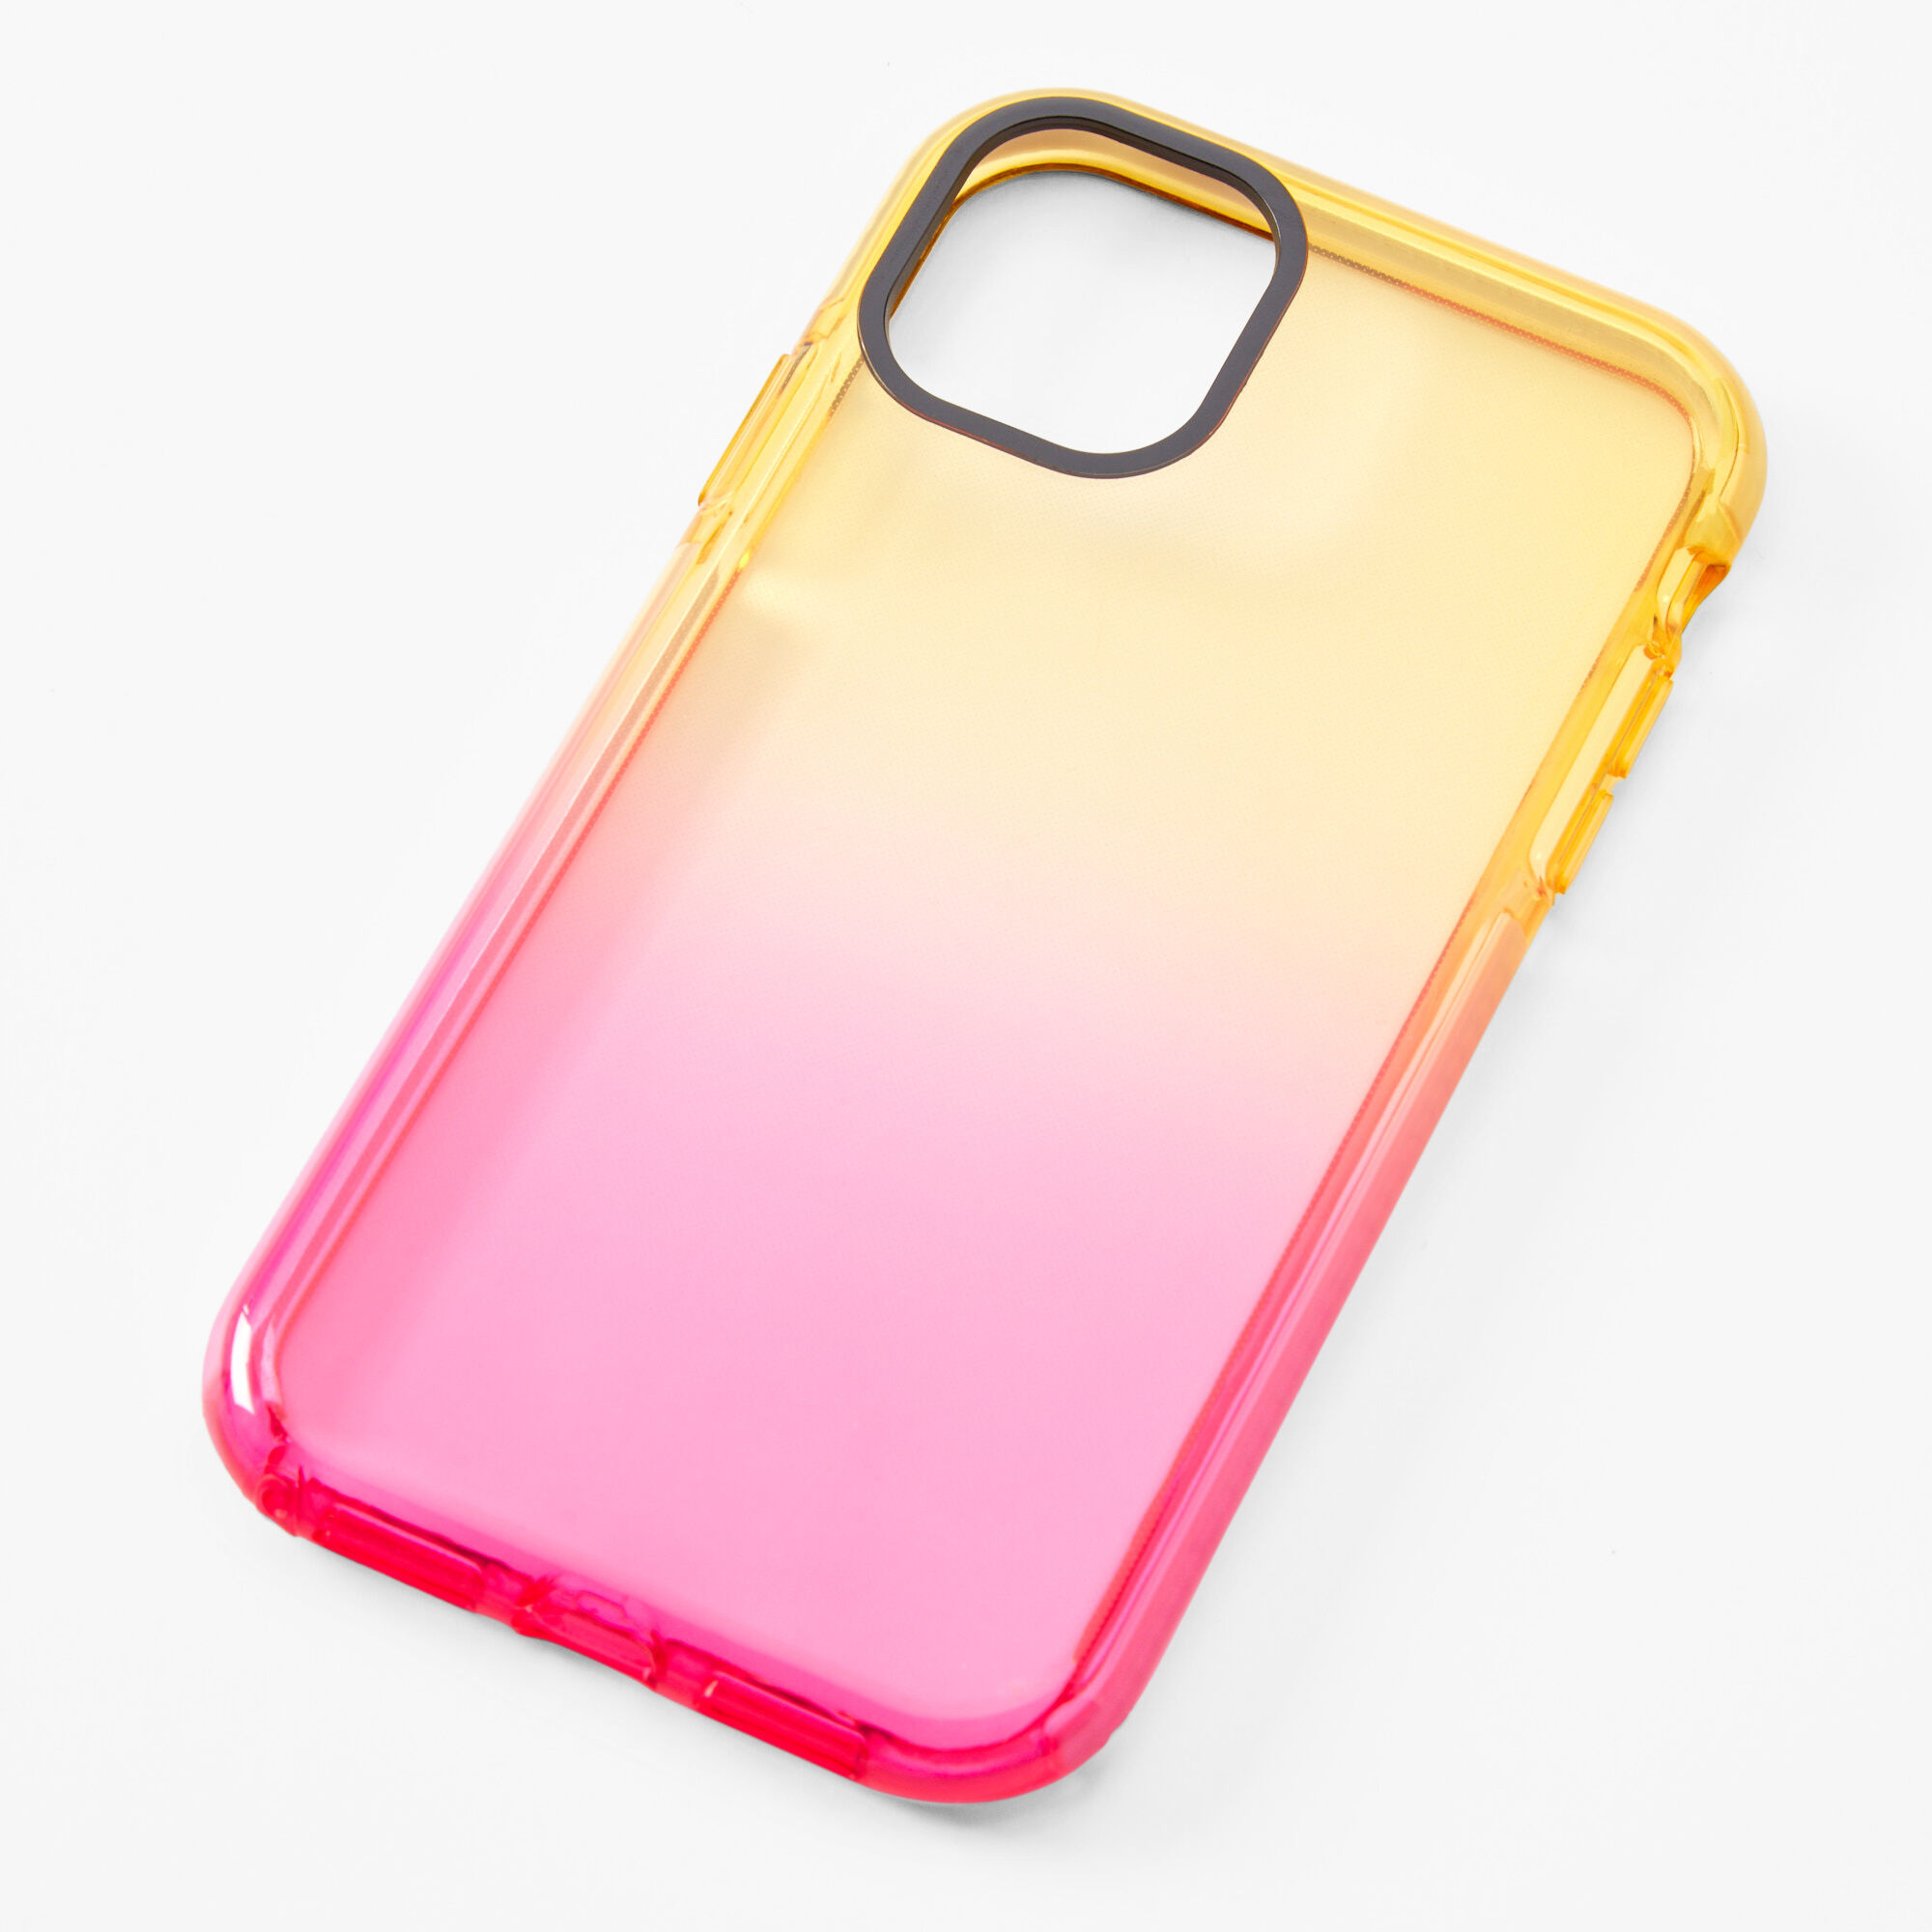 Solid Blush Pink Silicone Phone Case - Fits iPhone® 11